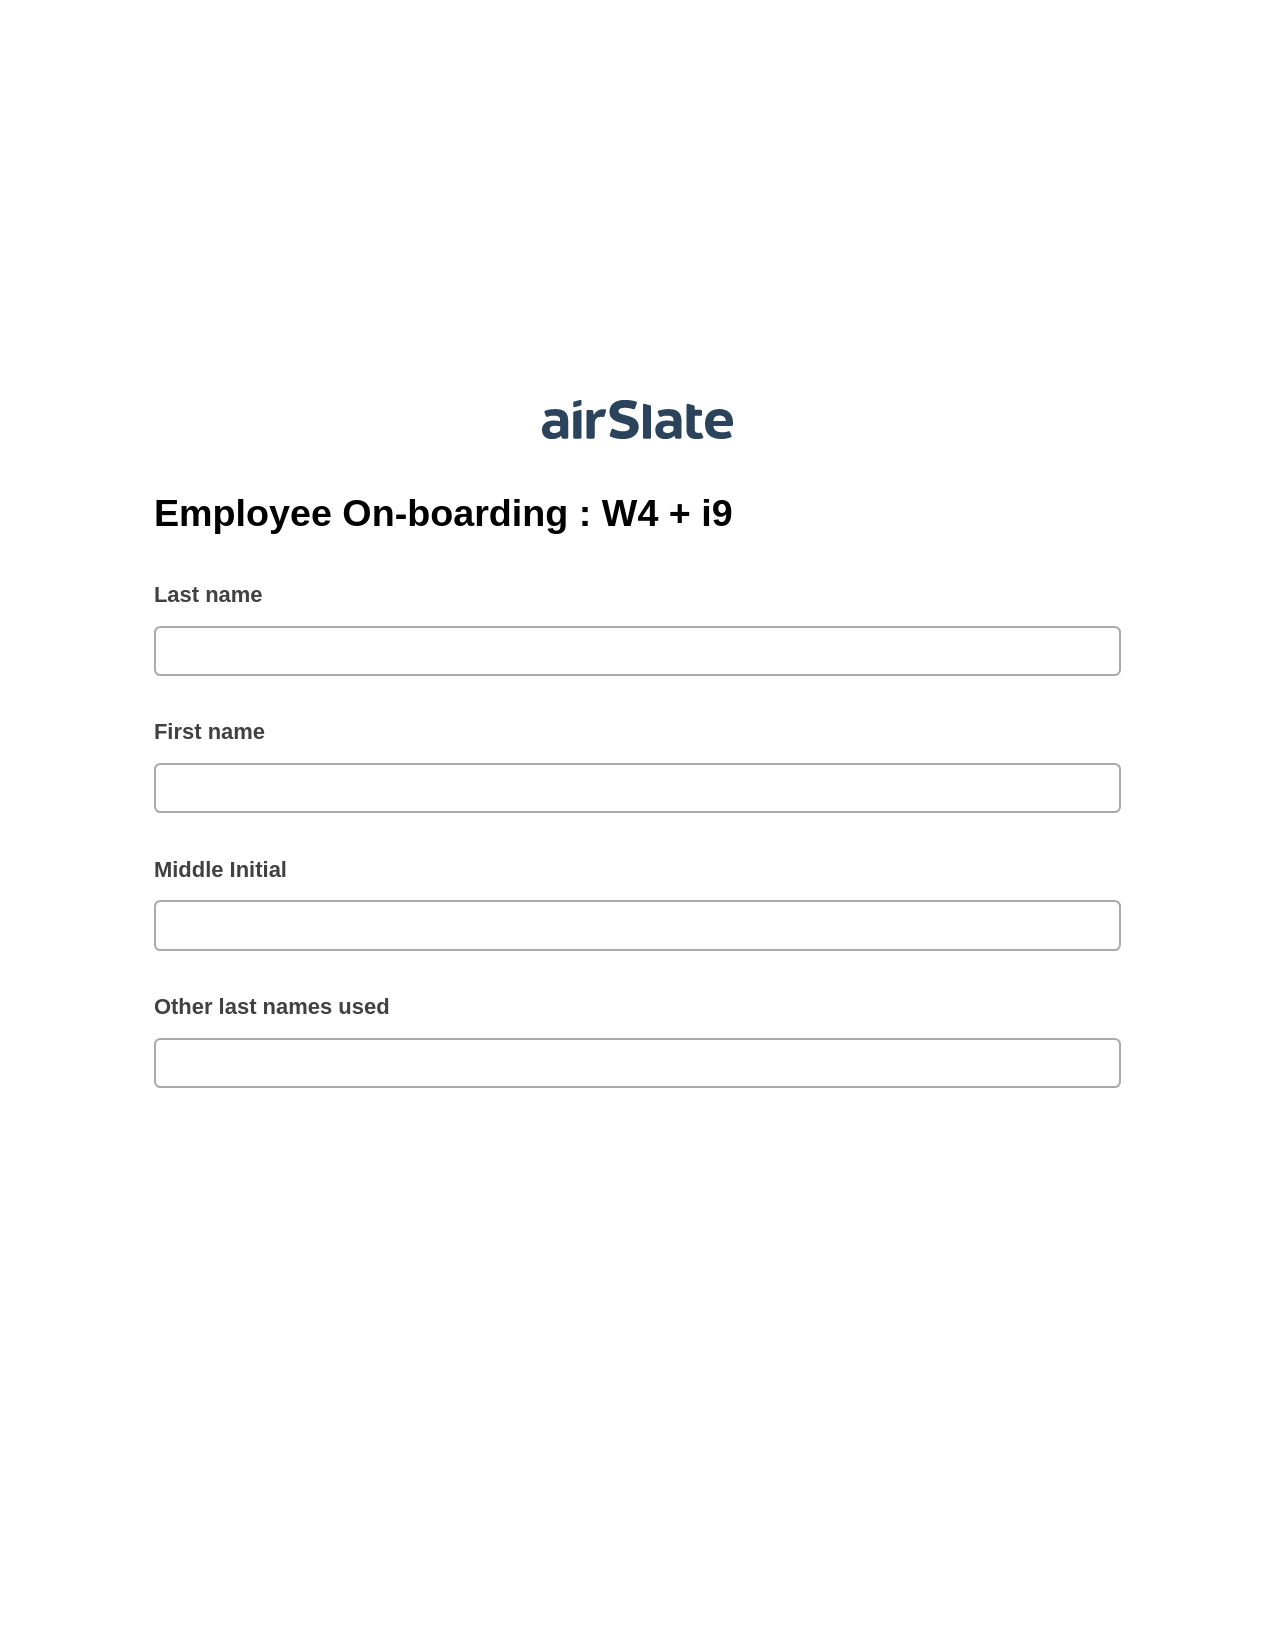 Employee On-boarding : W4 + i9 Pre-fill Dropdowns from Excel Bot, Set Signature Type Bot, Post-finish Document Bot